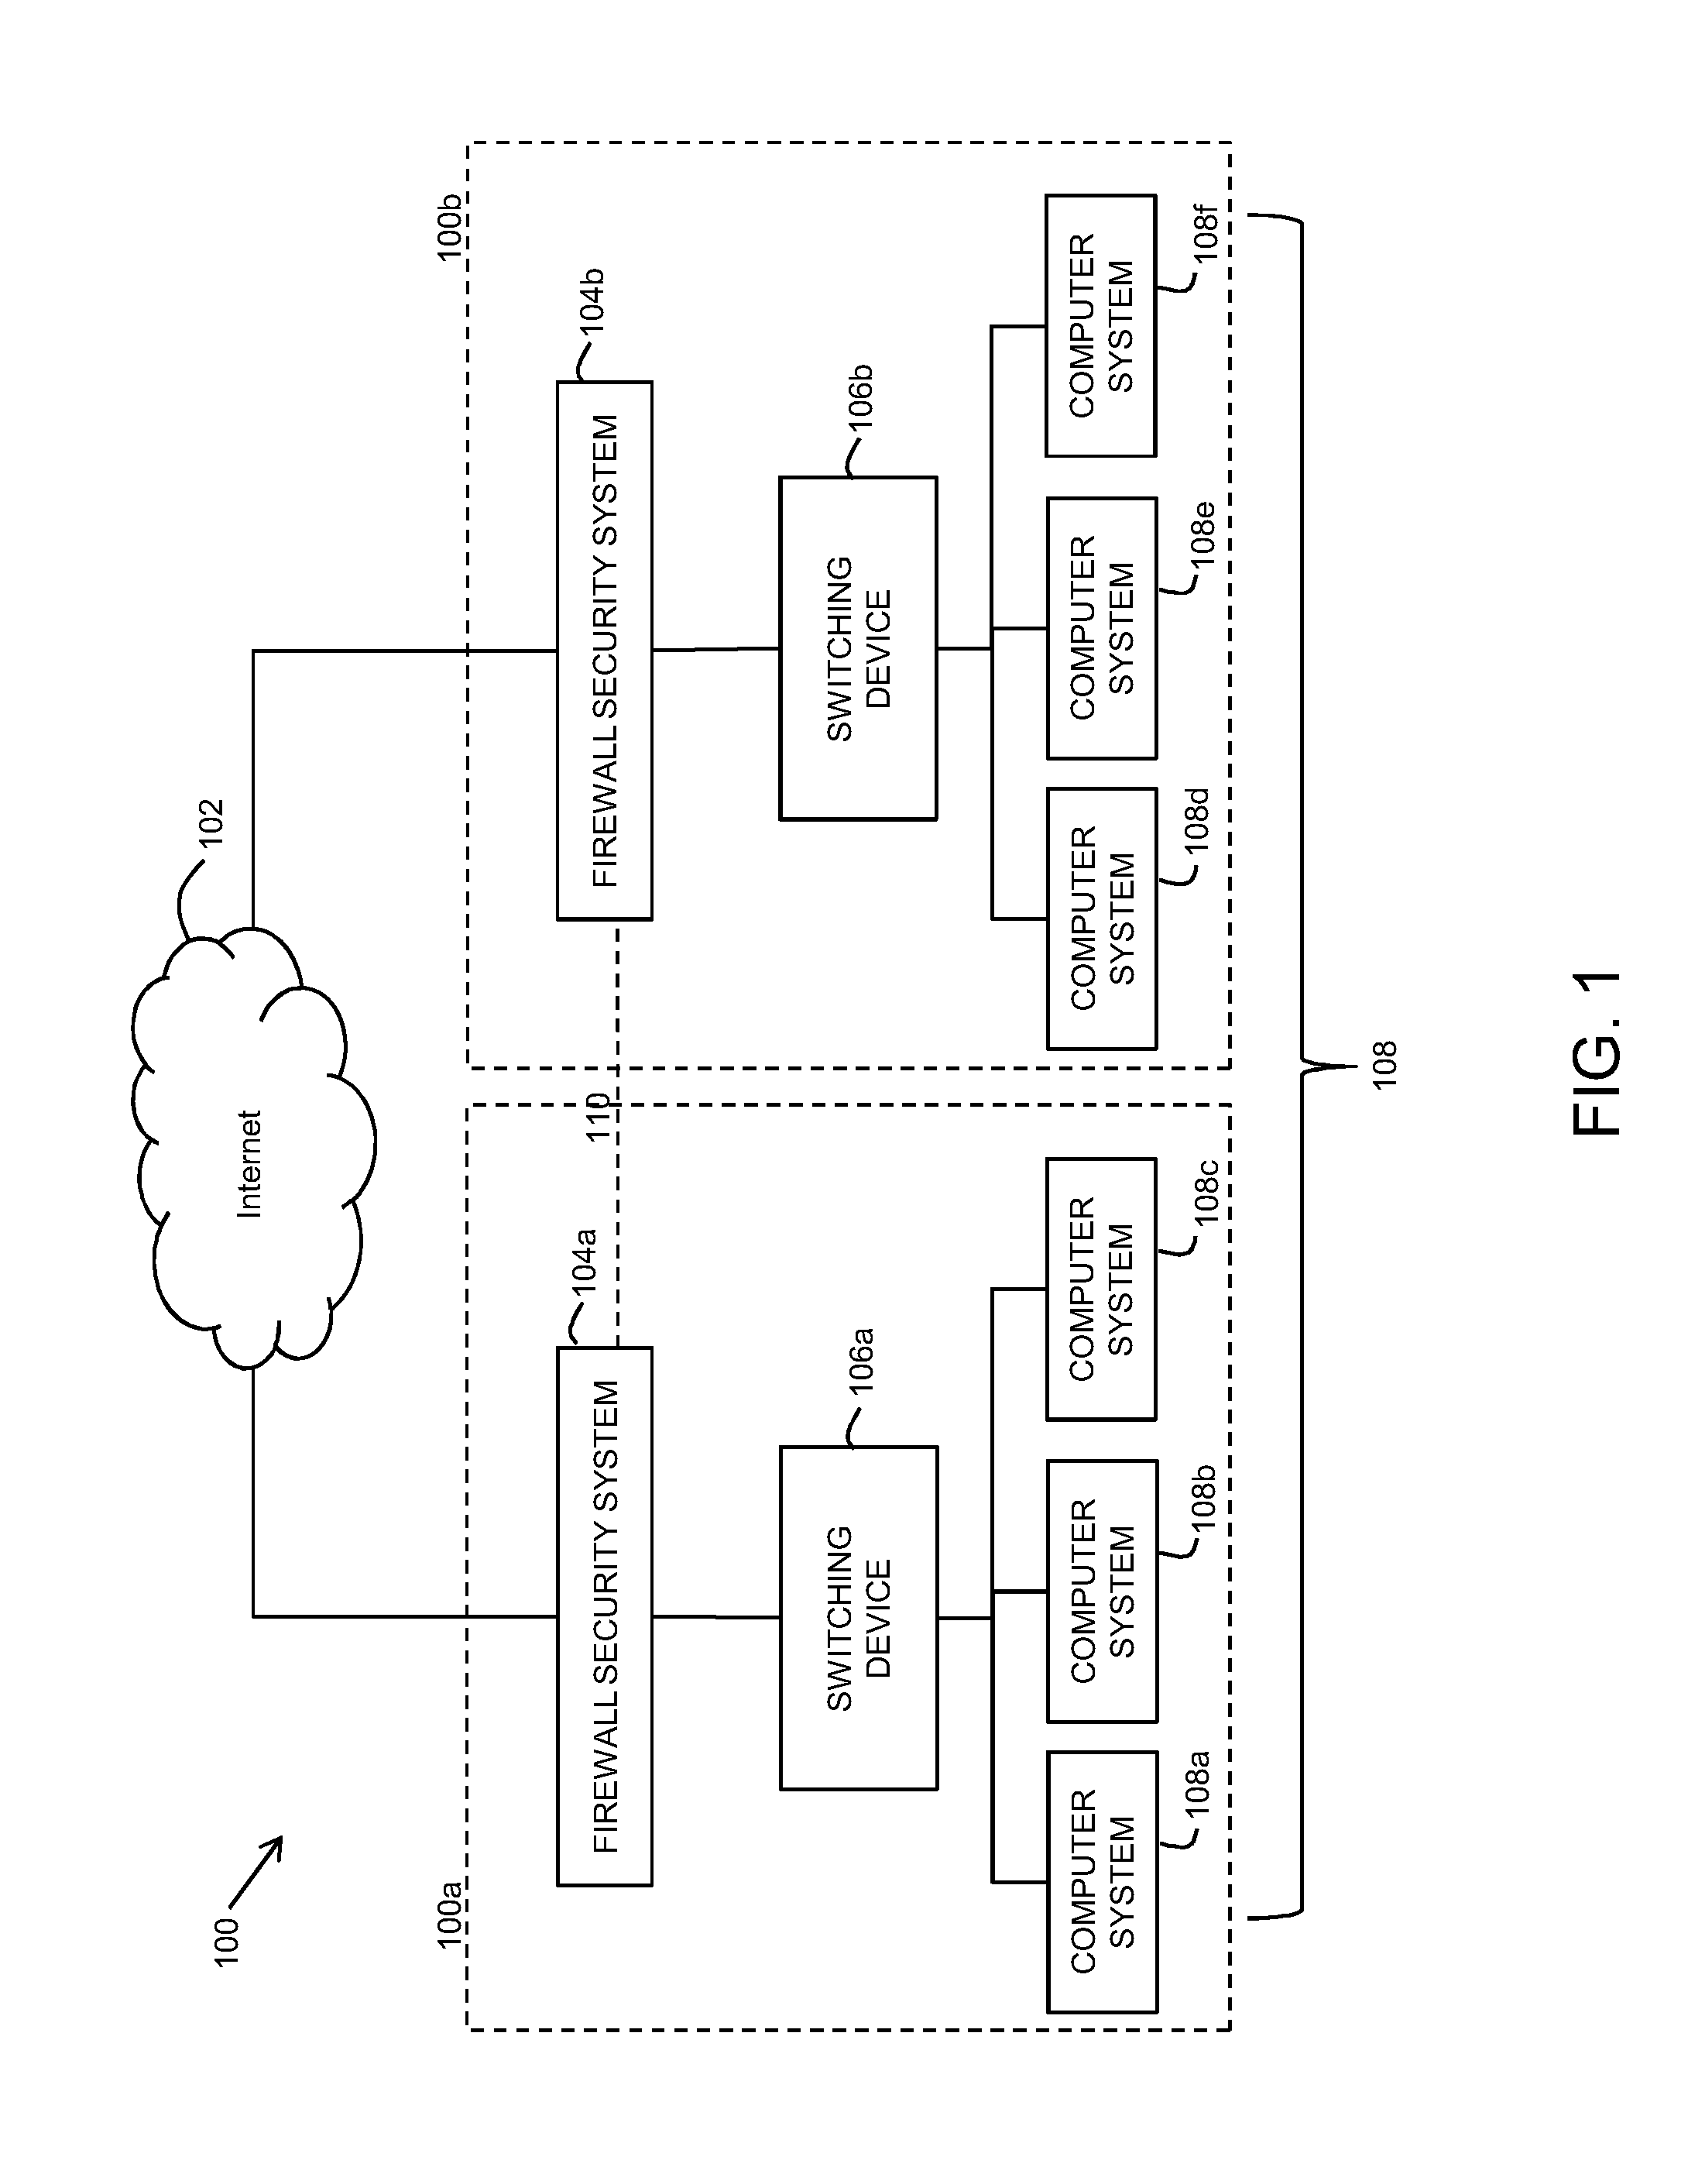 Policy-based configuration of internet protocol security for a virtual private network